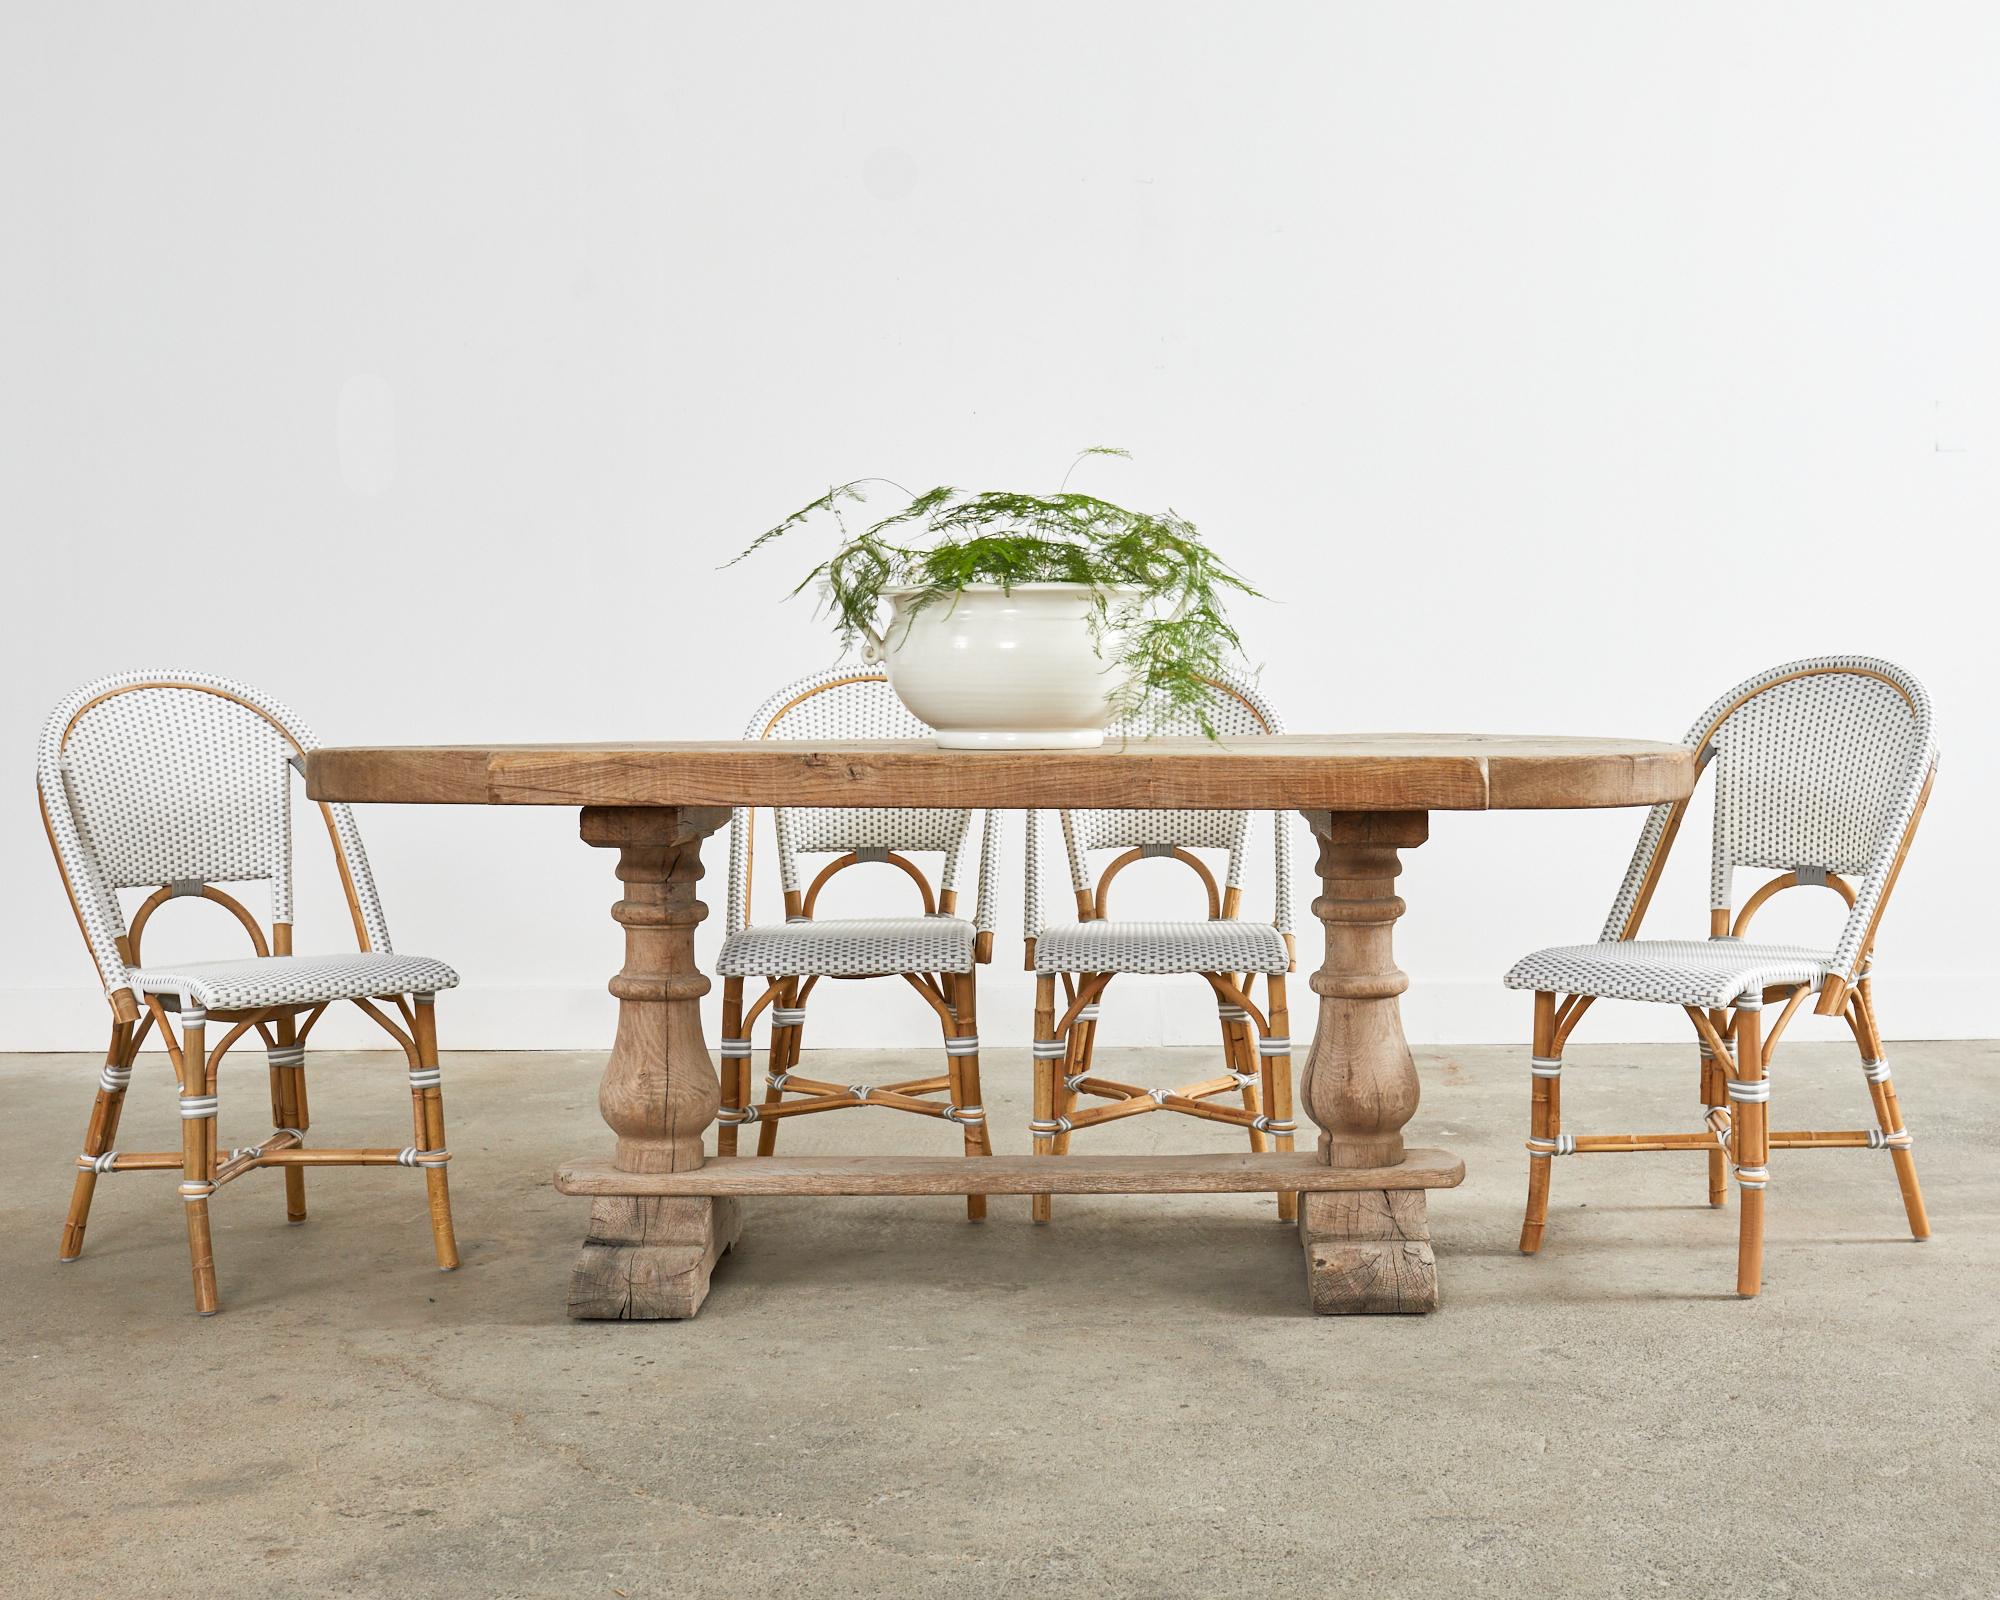 Substantial country French farmhouse dining table featuring round demilune ends. Beautifully crafted from thick, solid oak with an aged, weathered bleached finish. The plank top is 3 inches thick with notched demi-lune form ends. Supported by a